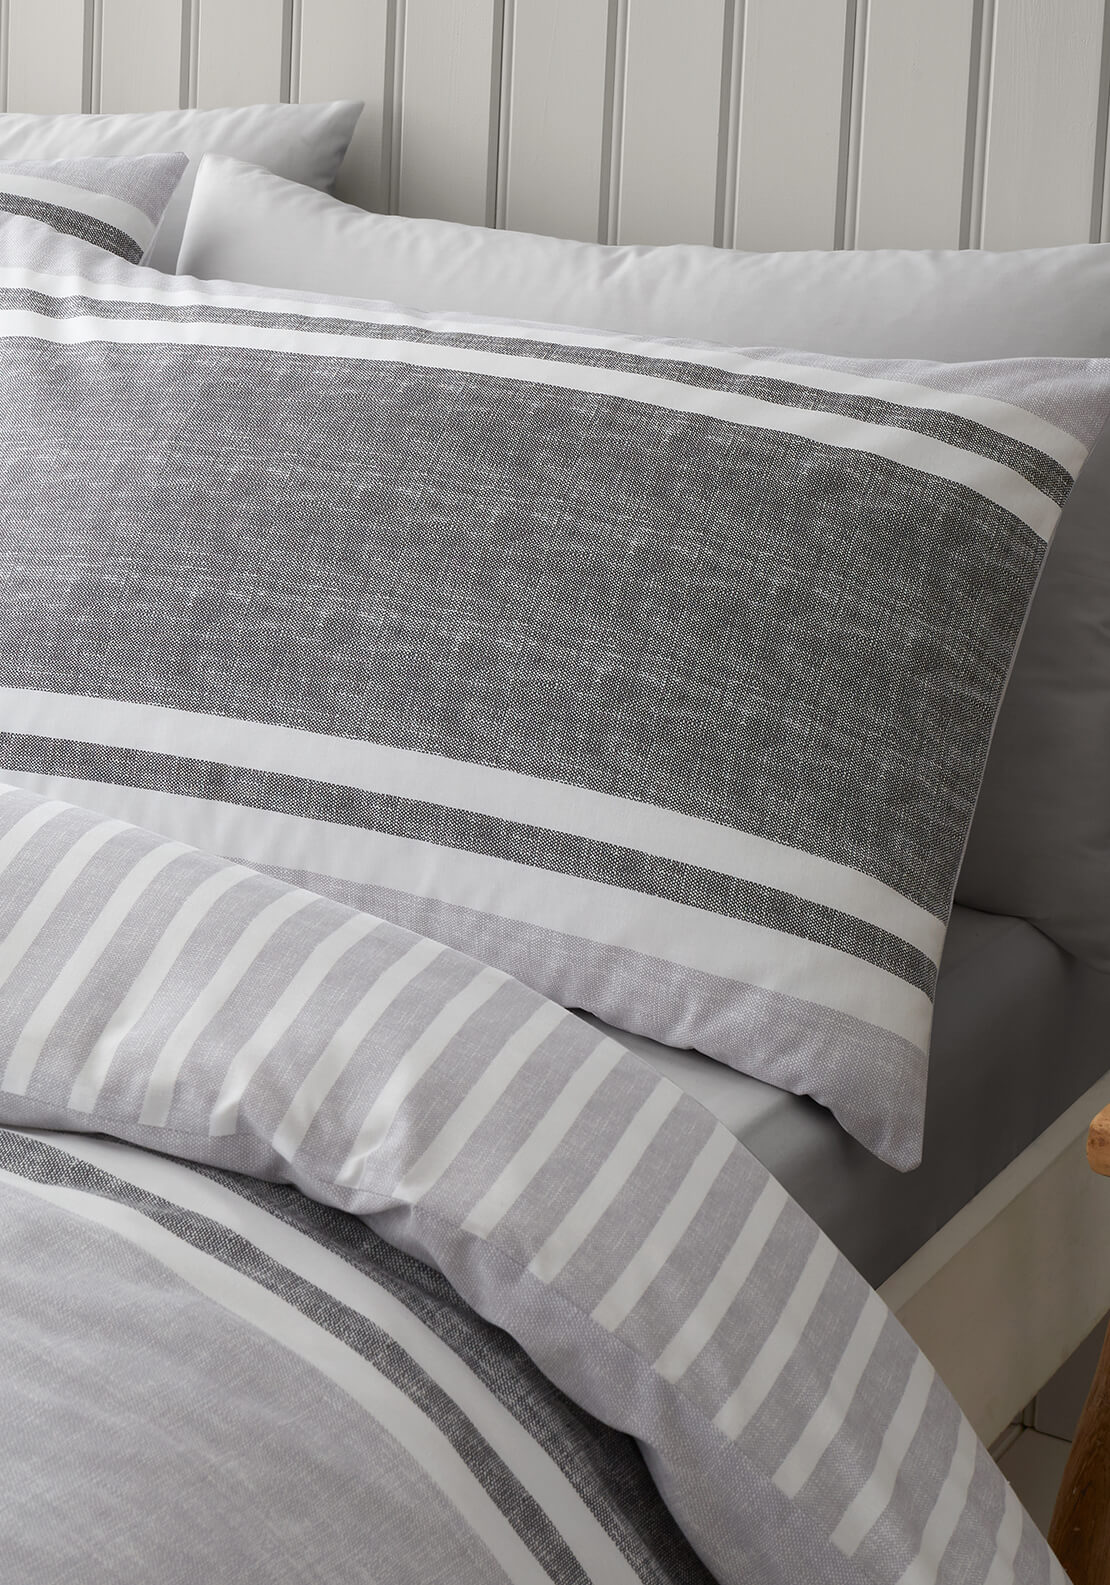  The Home Collection Classic Textured Banded Stripe Reversible Duvet Cover Set - Grey 2 Shaws Department Stores